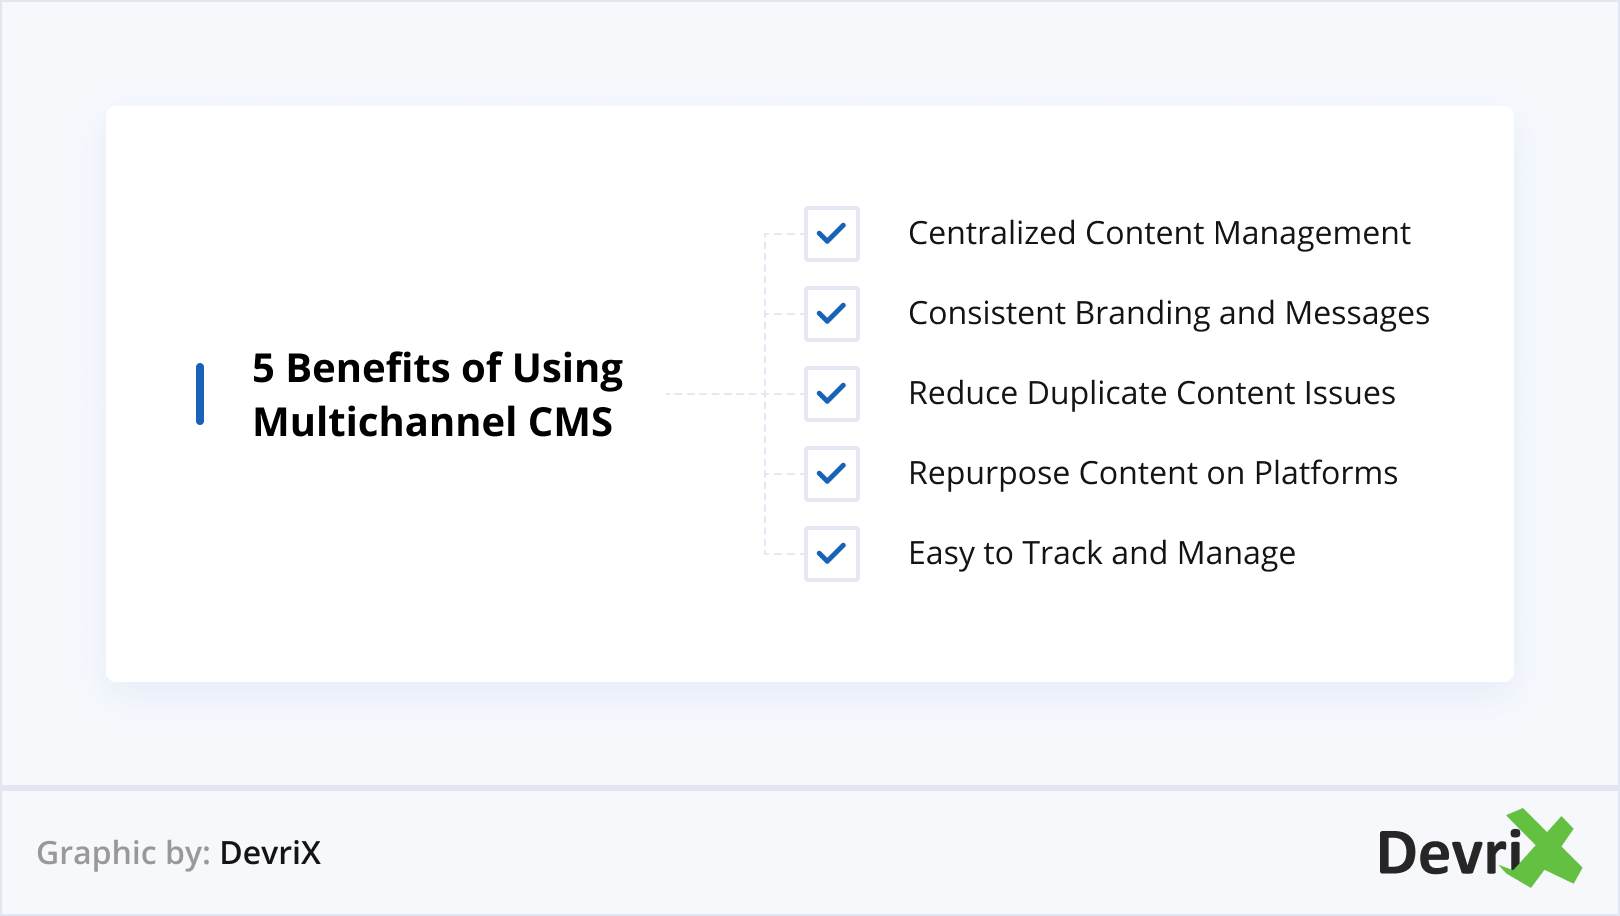 5 Benefits of Using Multichannel CMS